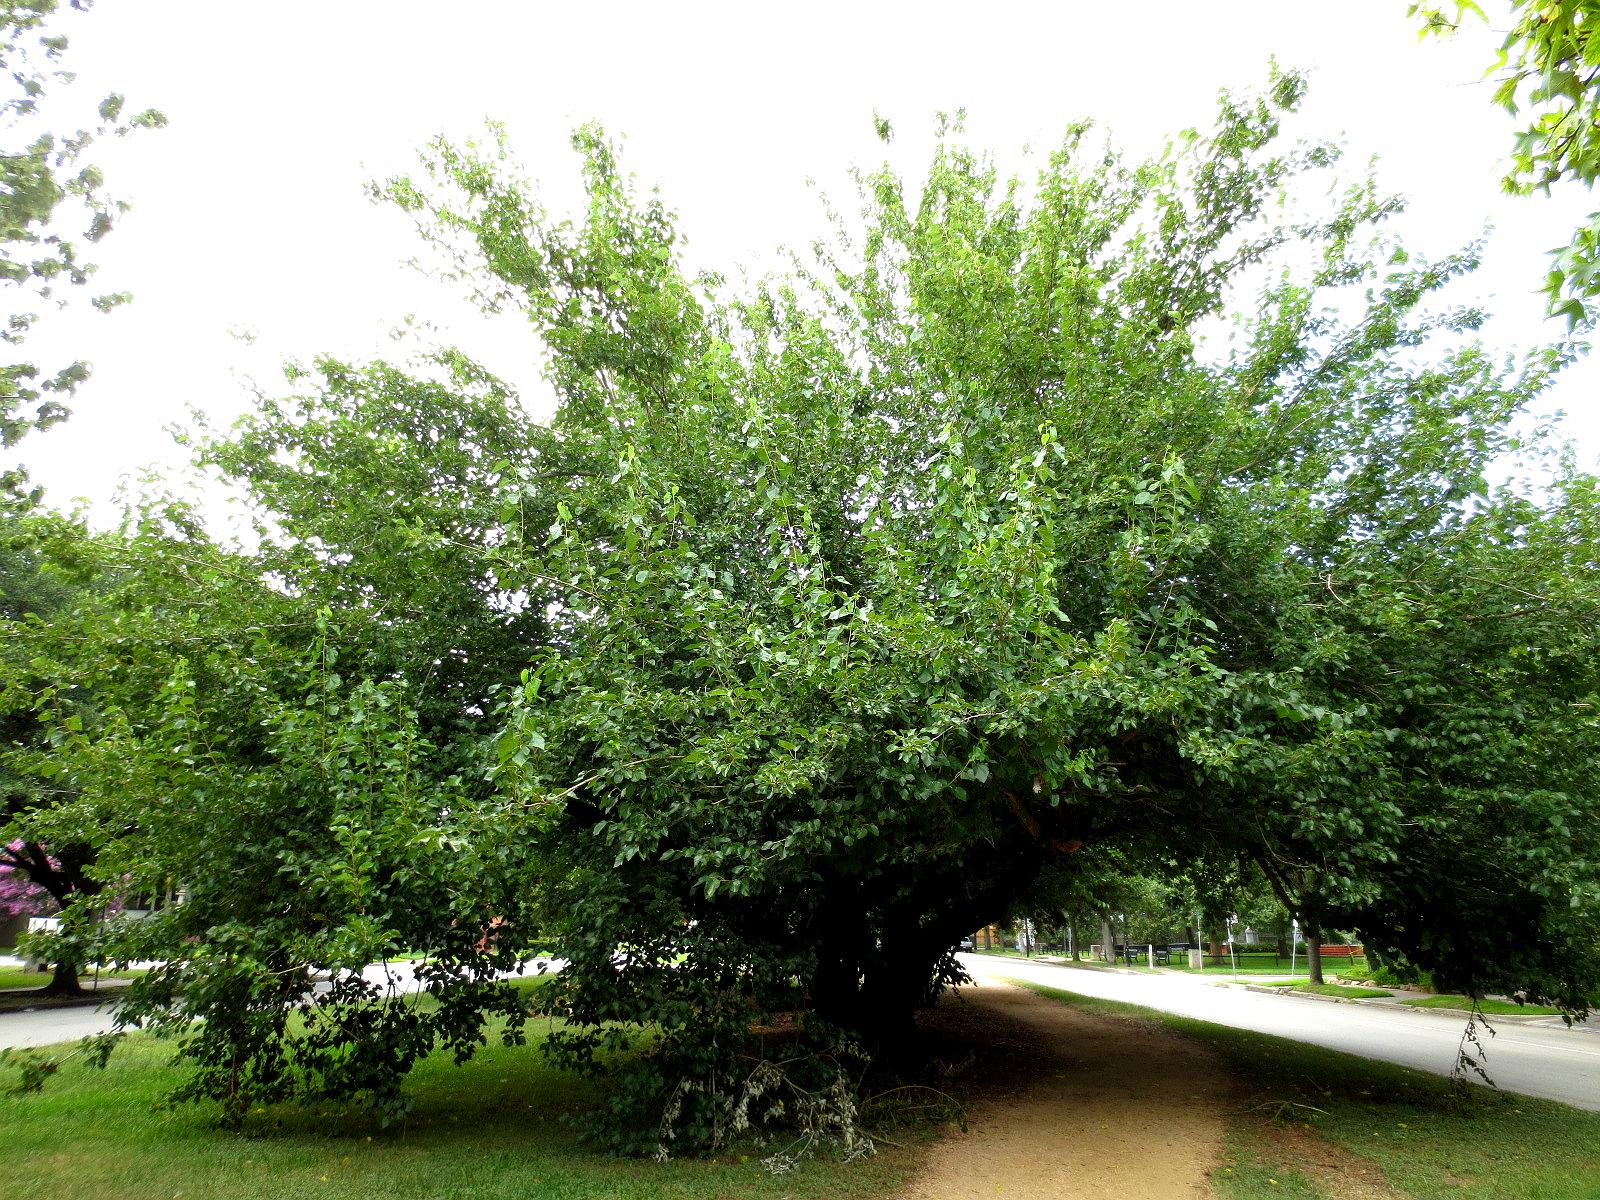 Remarkable Trees of Texas: CLIMBING TREES: THE OLD MULBERRY ON HEIGHTS BLVD